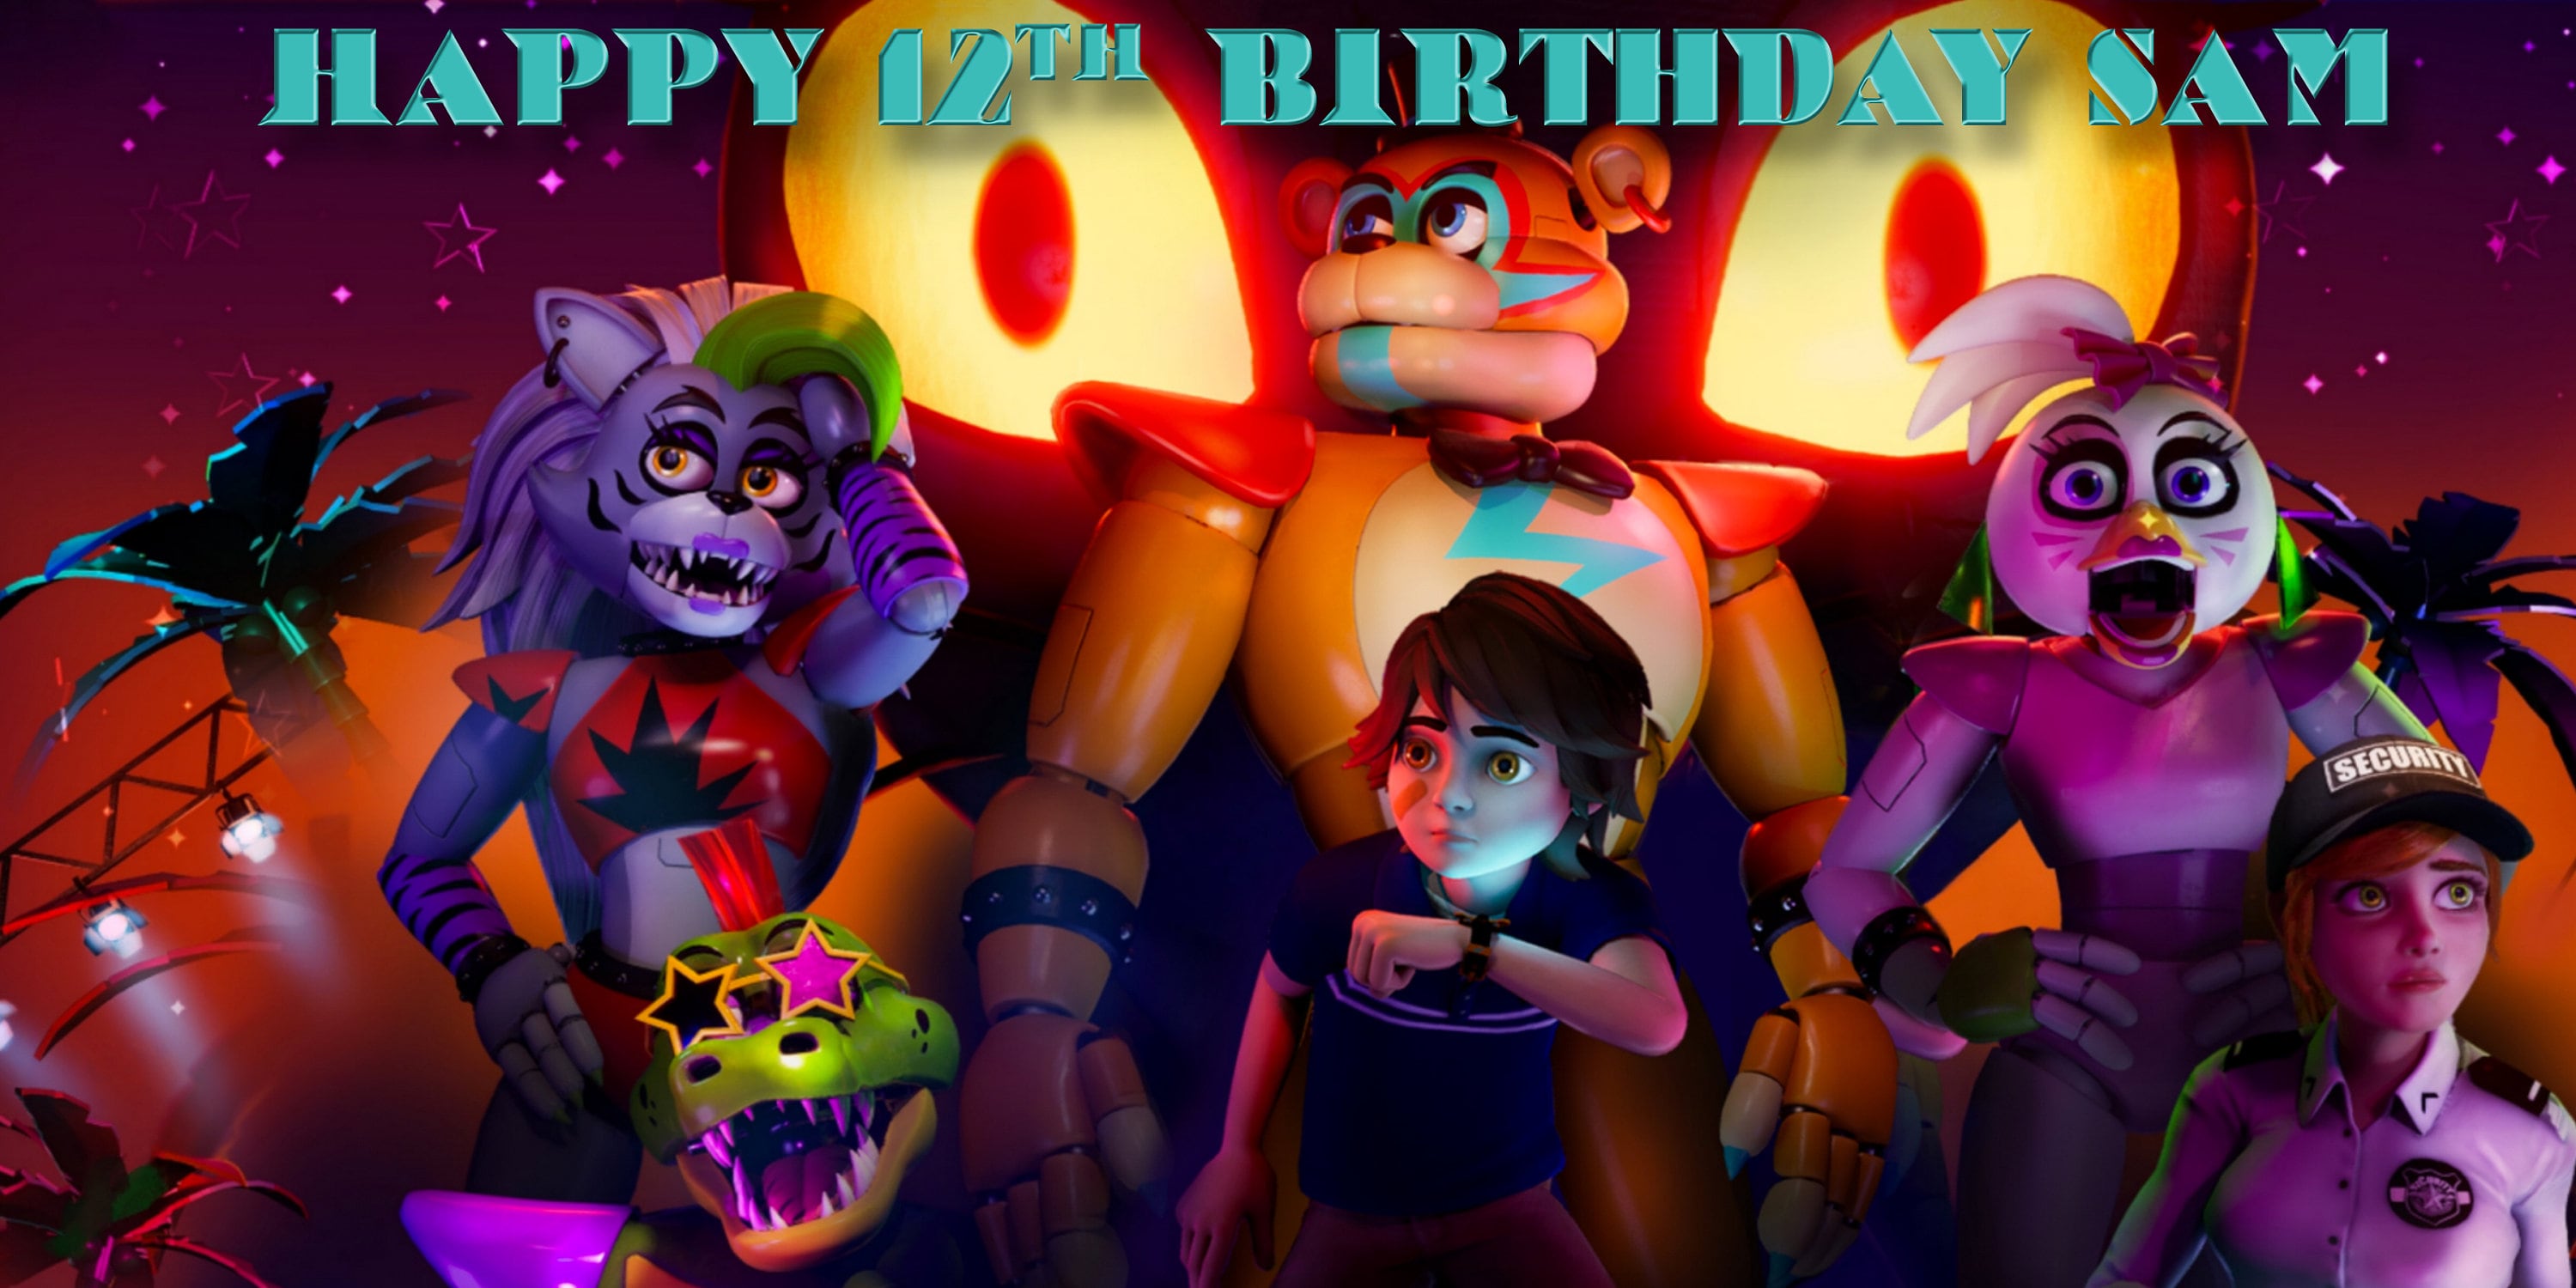 FIVE NIGHTS AT FREDDYS SECURITY BREACH. POSTER, GIFT, birthday